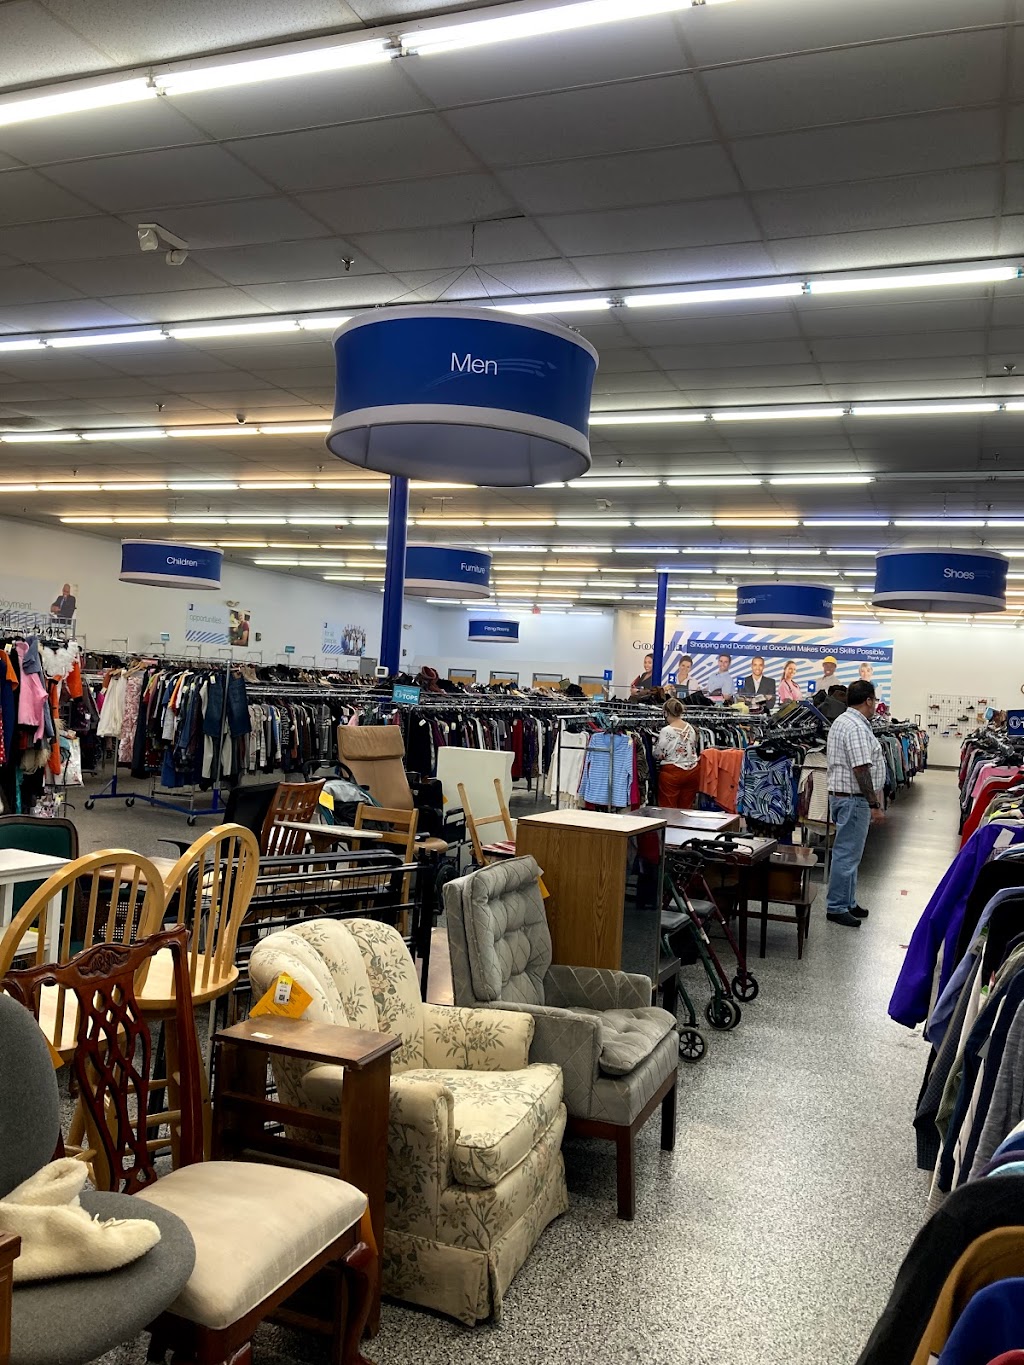 Goodwill Industries of Greater Cleveland & East Central Ohio | 23100 Lorain Rd, North Olmsted, OH 44070, USA | Phone: (440) 777-4422